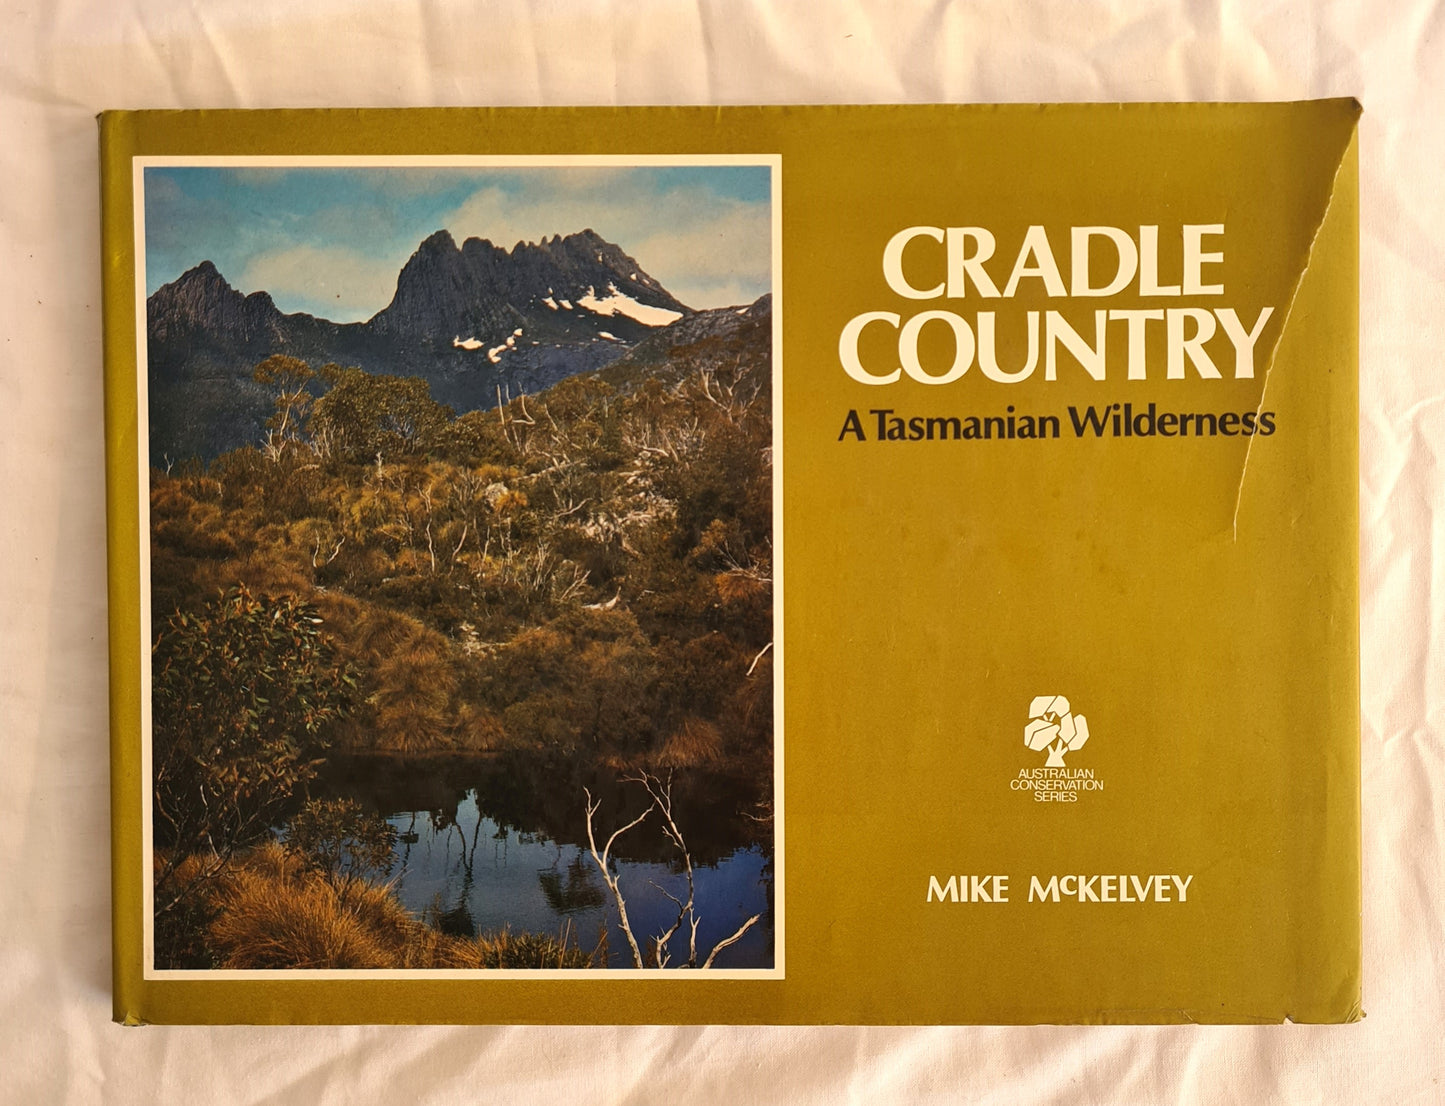 Cradle Country  A Tasmanian Wilderness  by Mike McKelvey